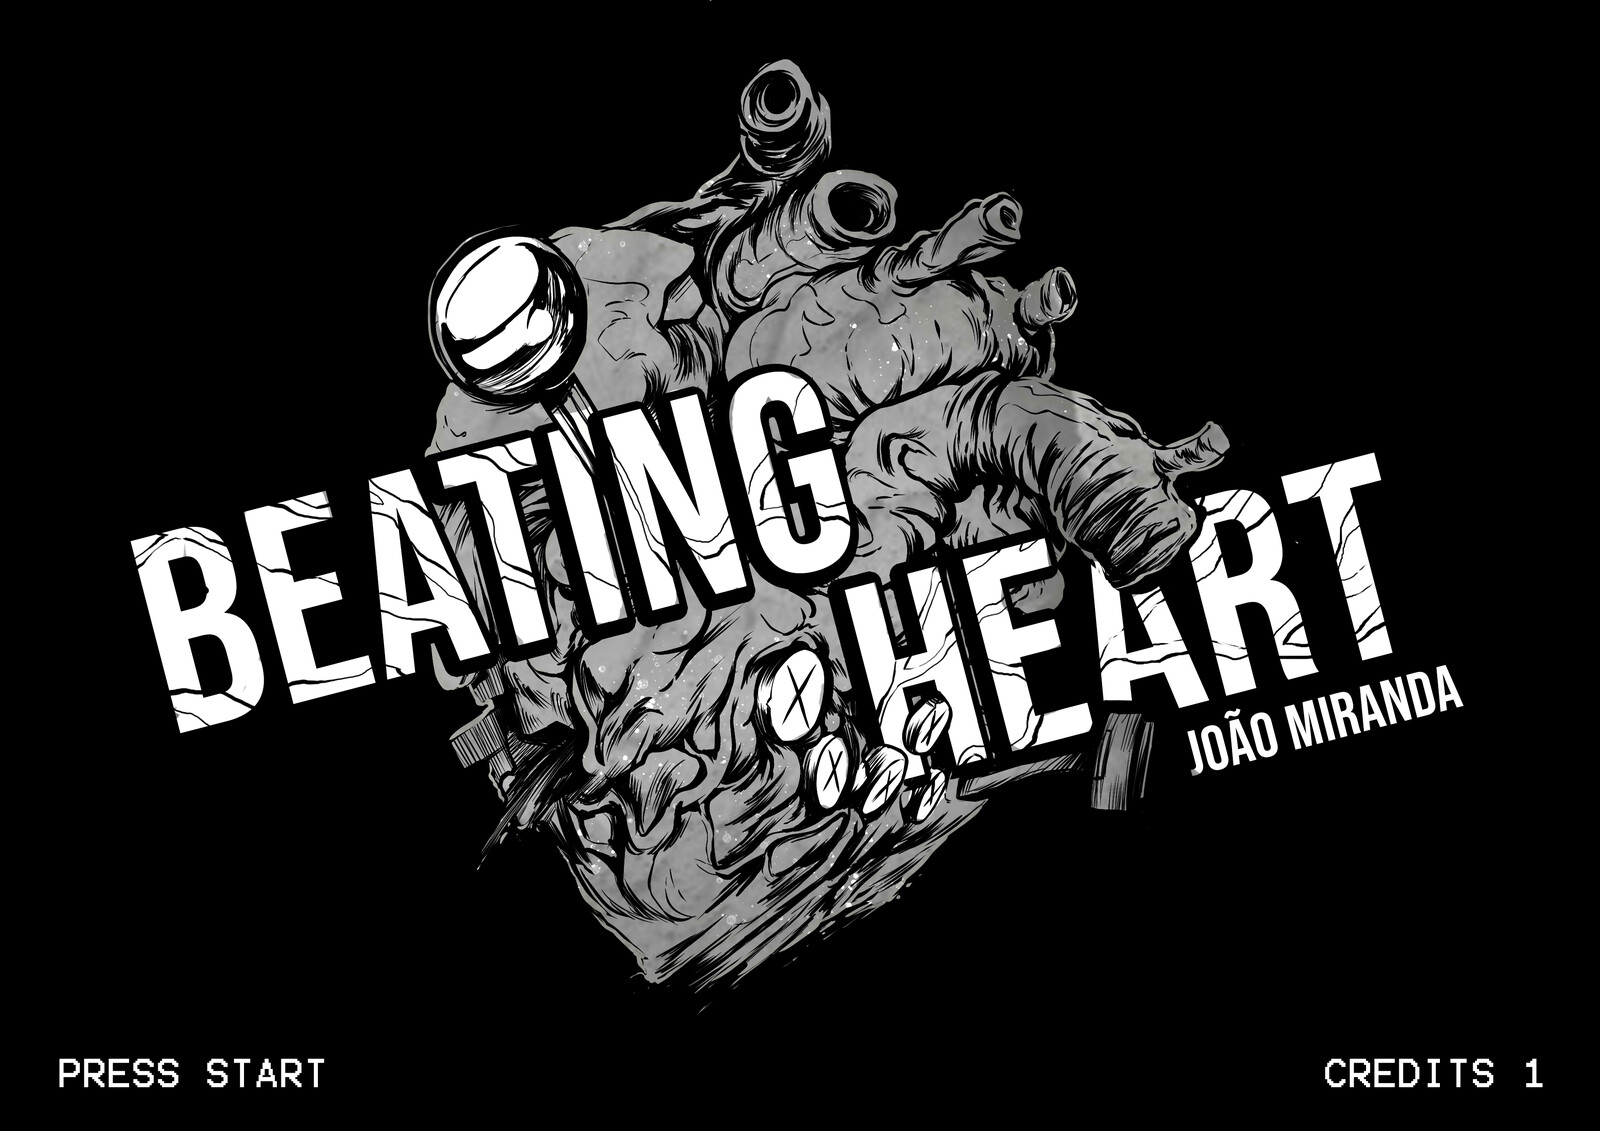 "Beating Heart" a metaphorical comic about videogames, obsession and literal death. Here some samples